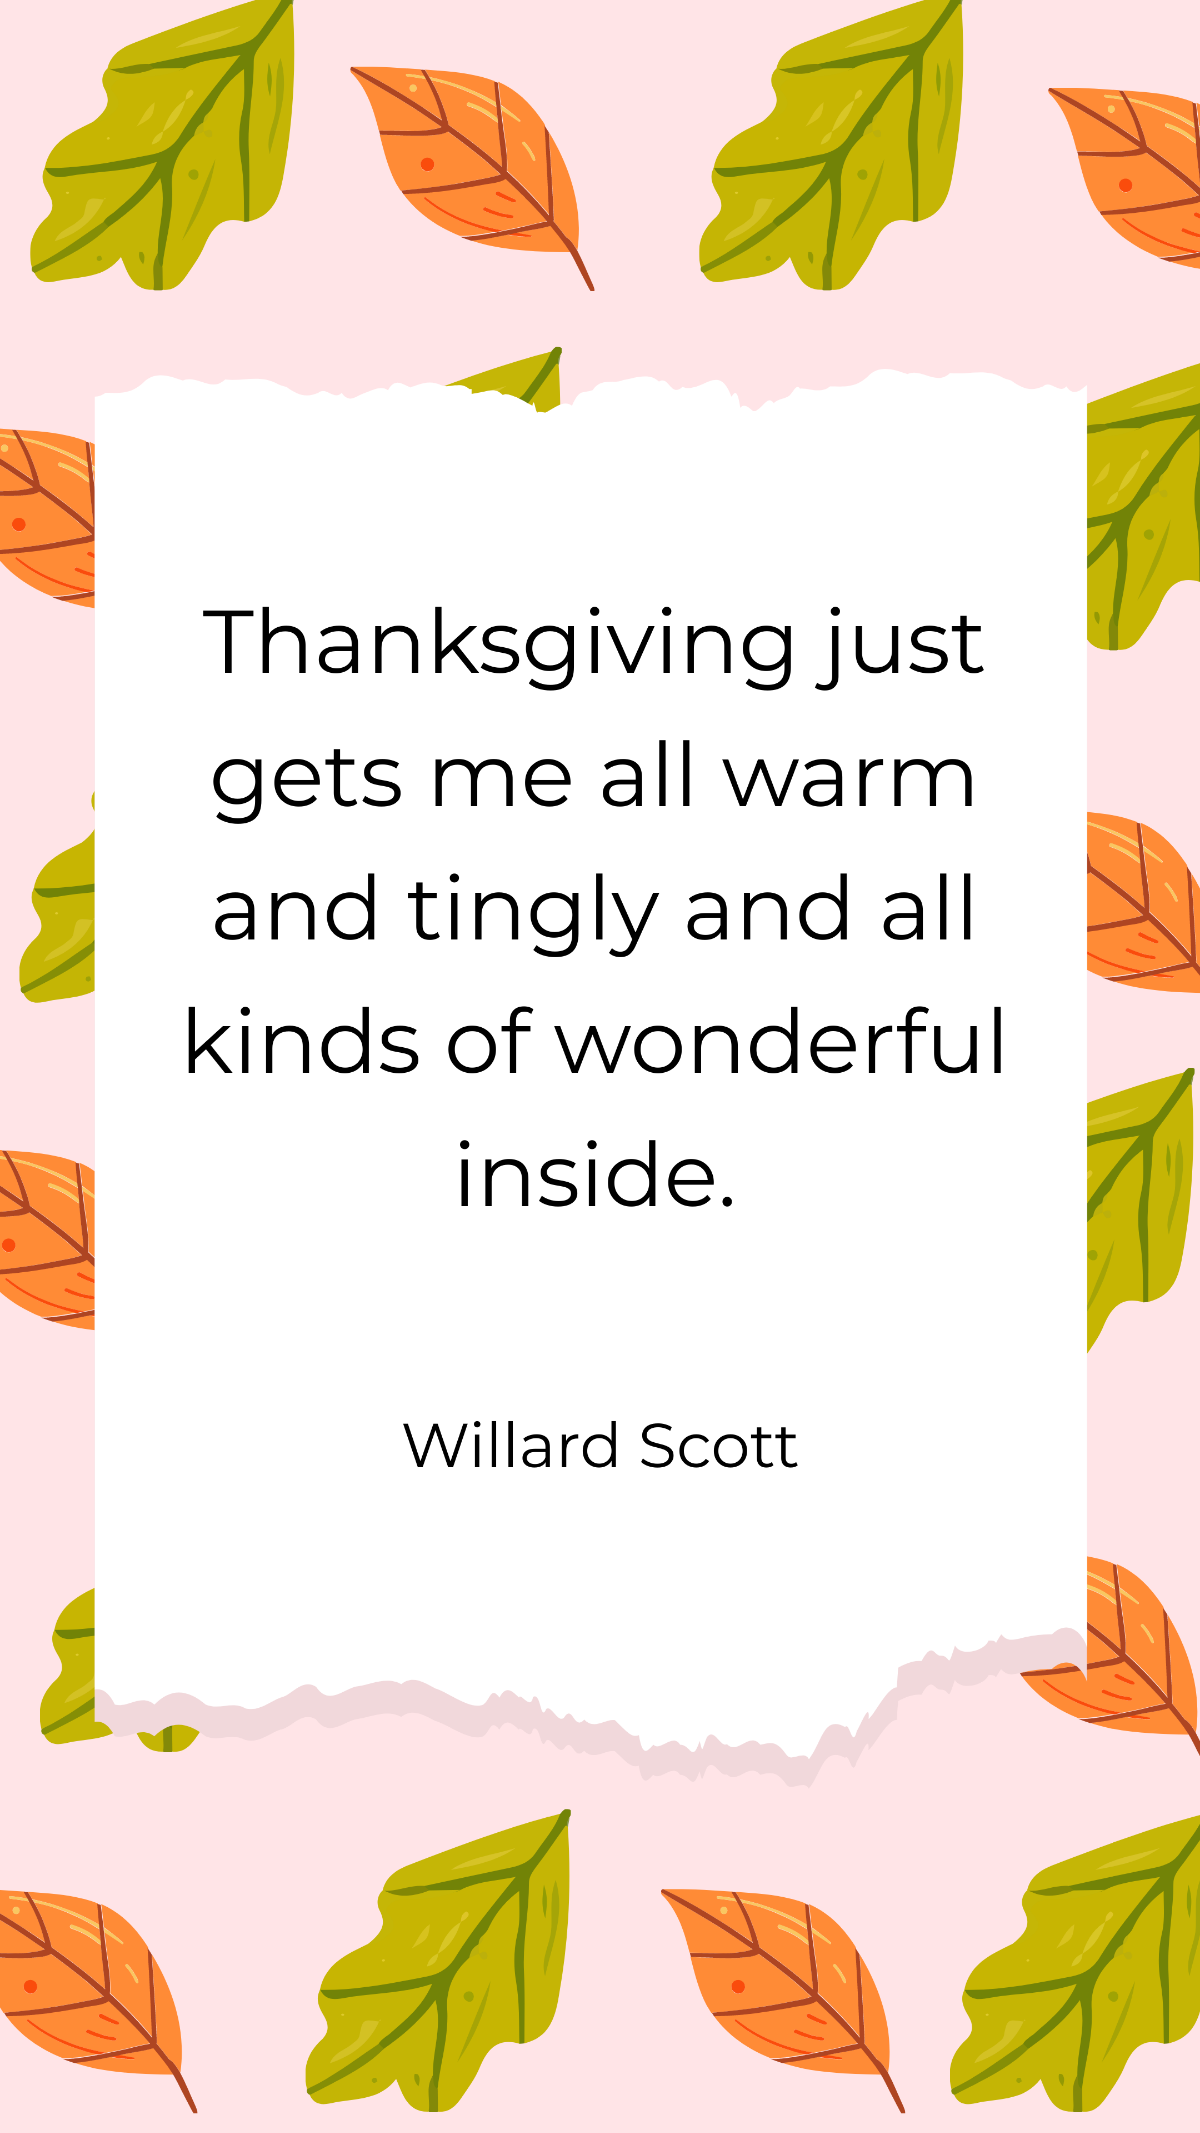 Willard Scott - Thanksgiving just gets me all warm and tingly and all kinds of wonderful inside. Template